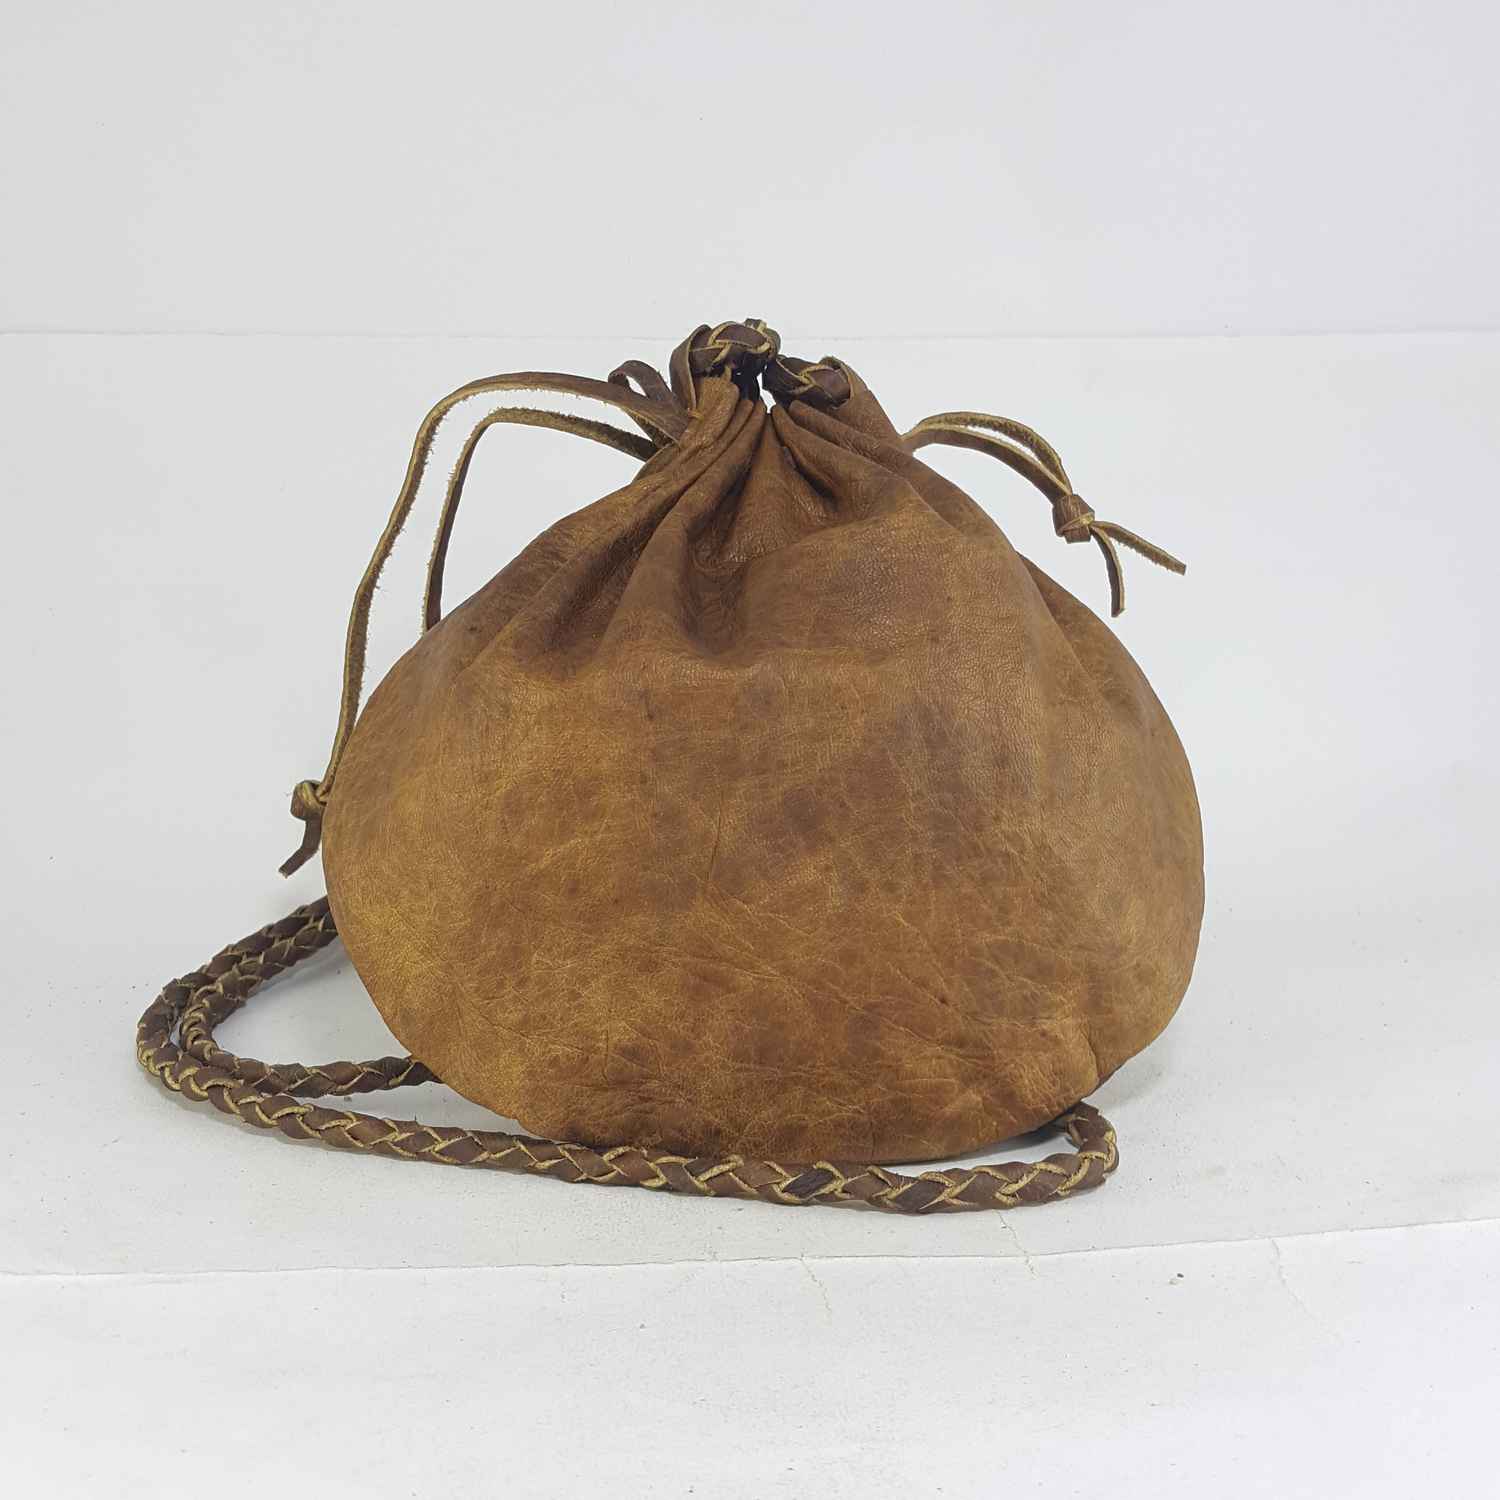 Himalayan Yak Leather Thaili, Bag, 18 by 18 cm, made by Pure Leather ...